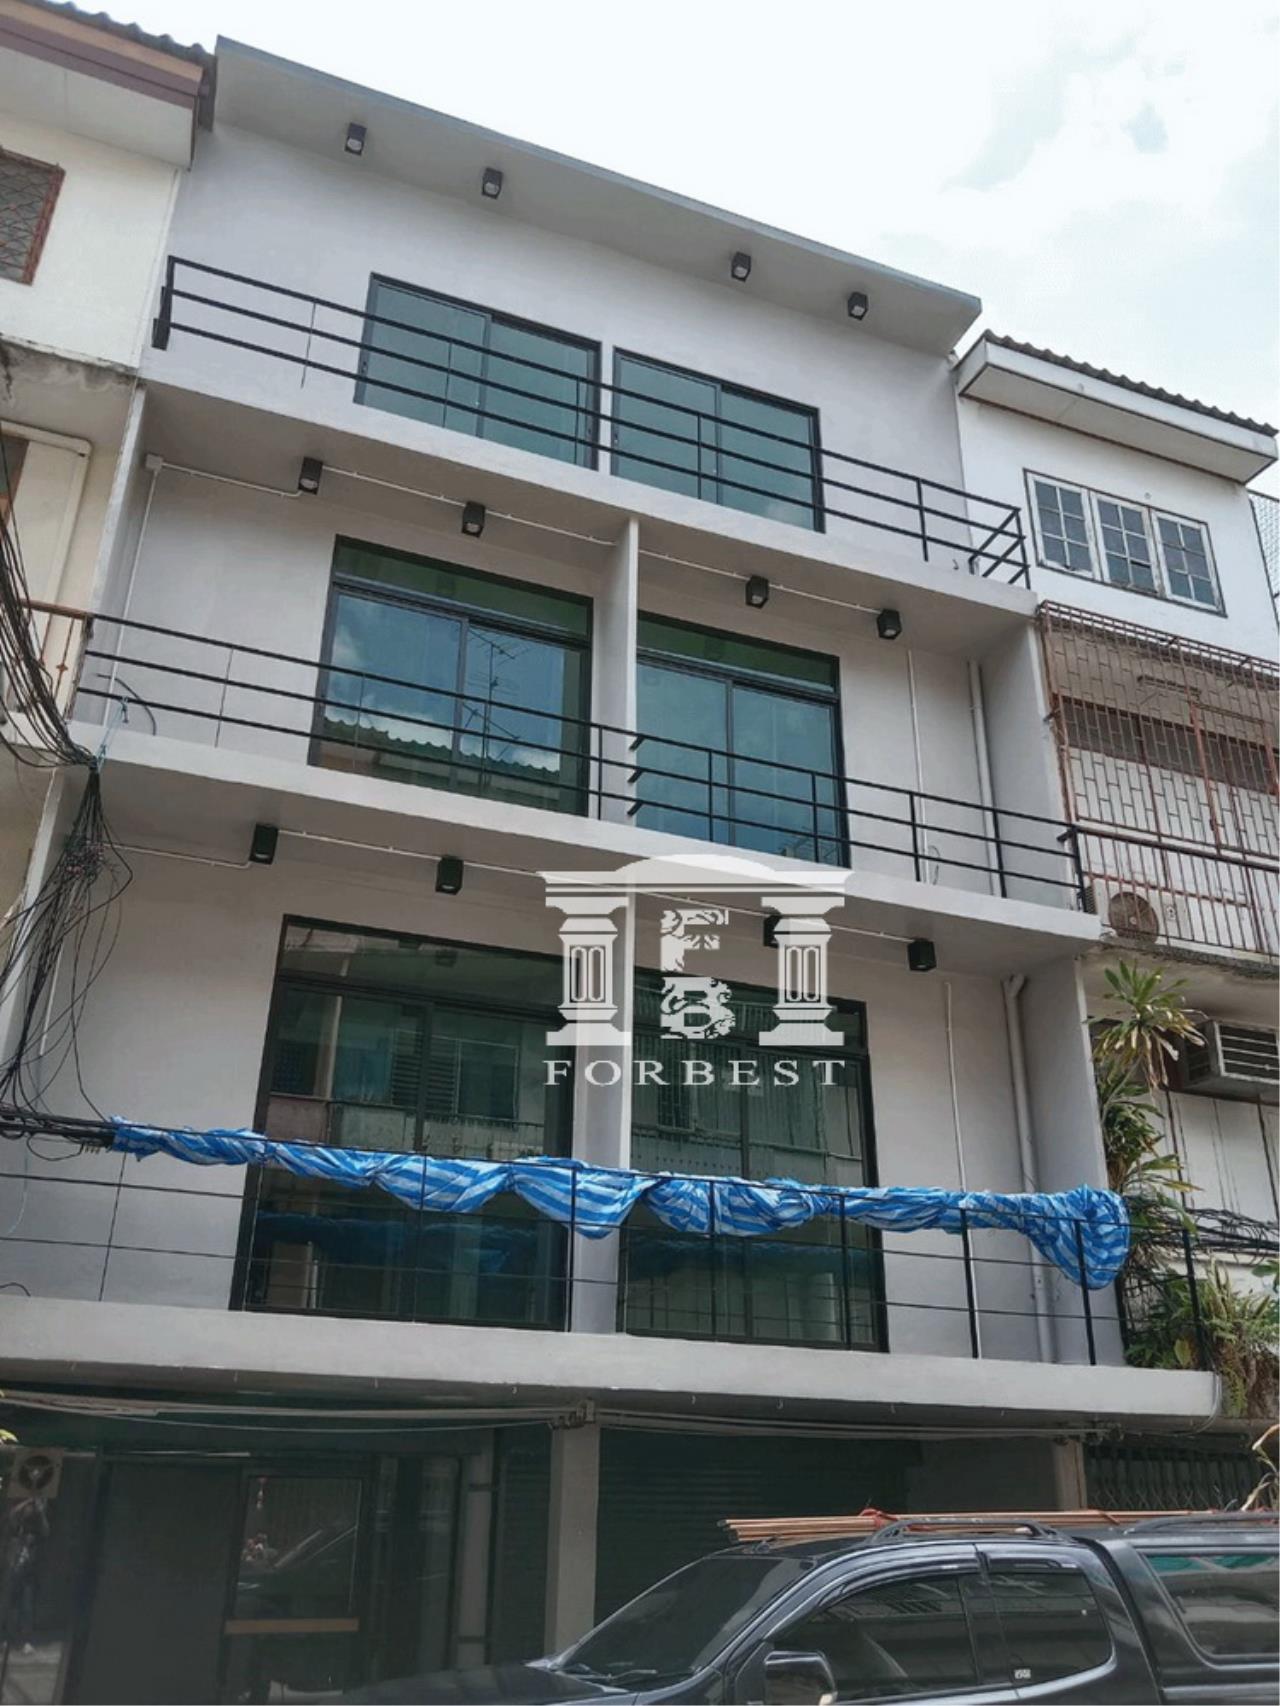 Forbest Properties Agency's 90499 - Sathupradit Rd., 4 storey Shophouse for sale, usable area 340 Sq.m. 1